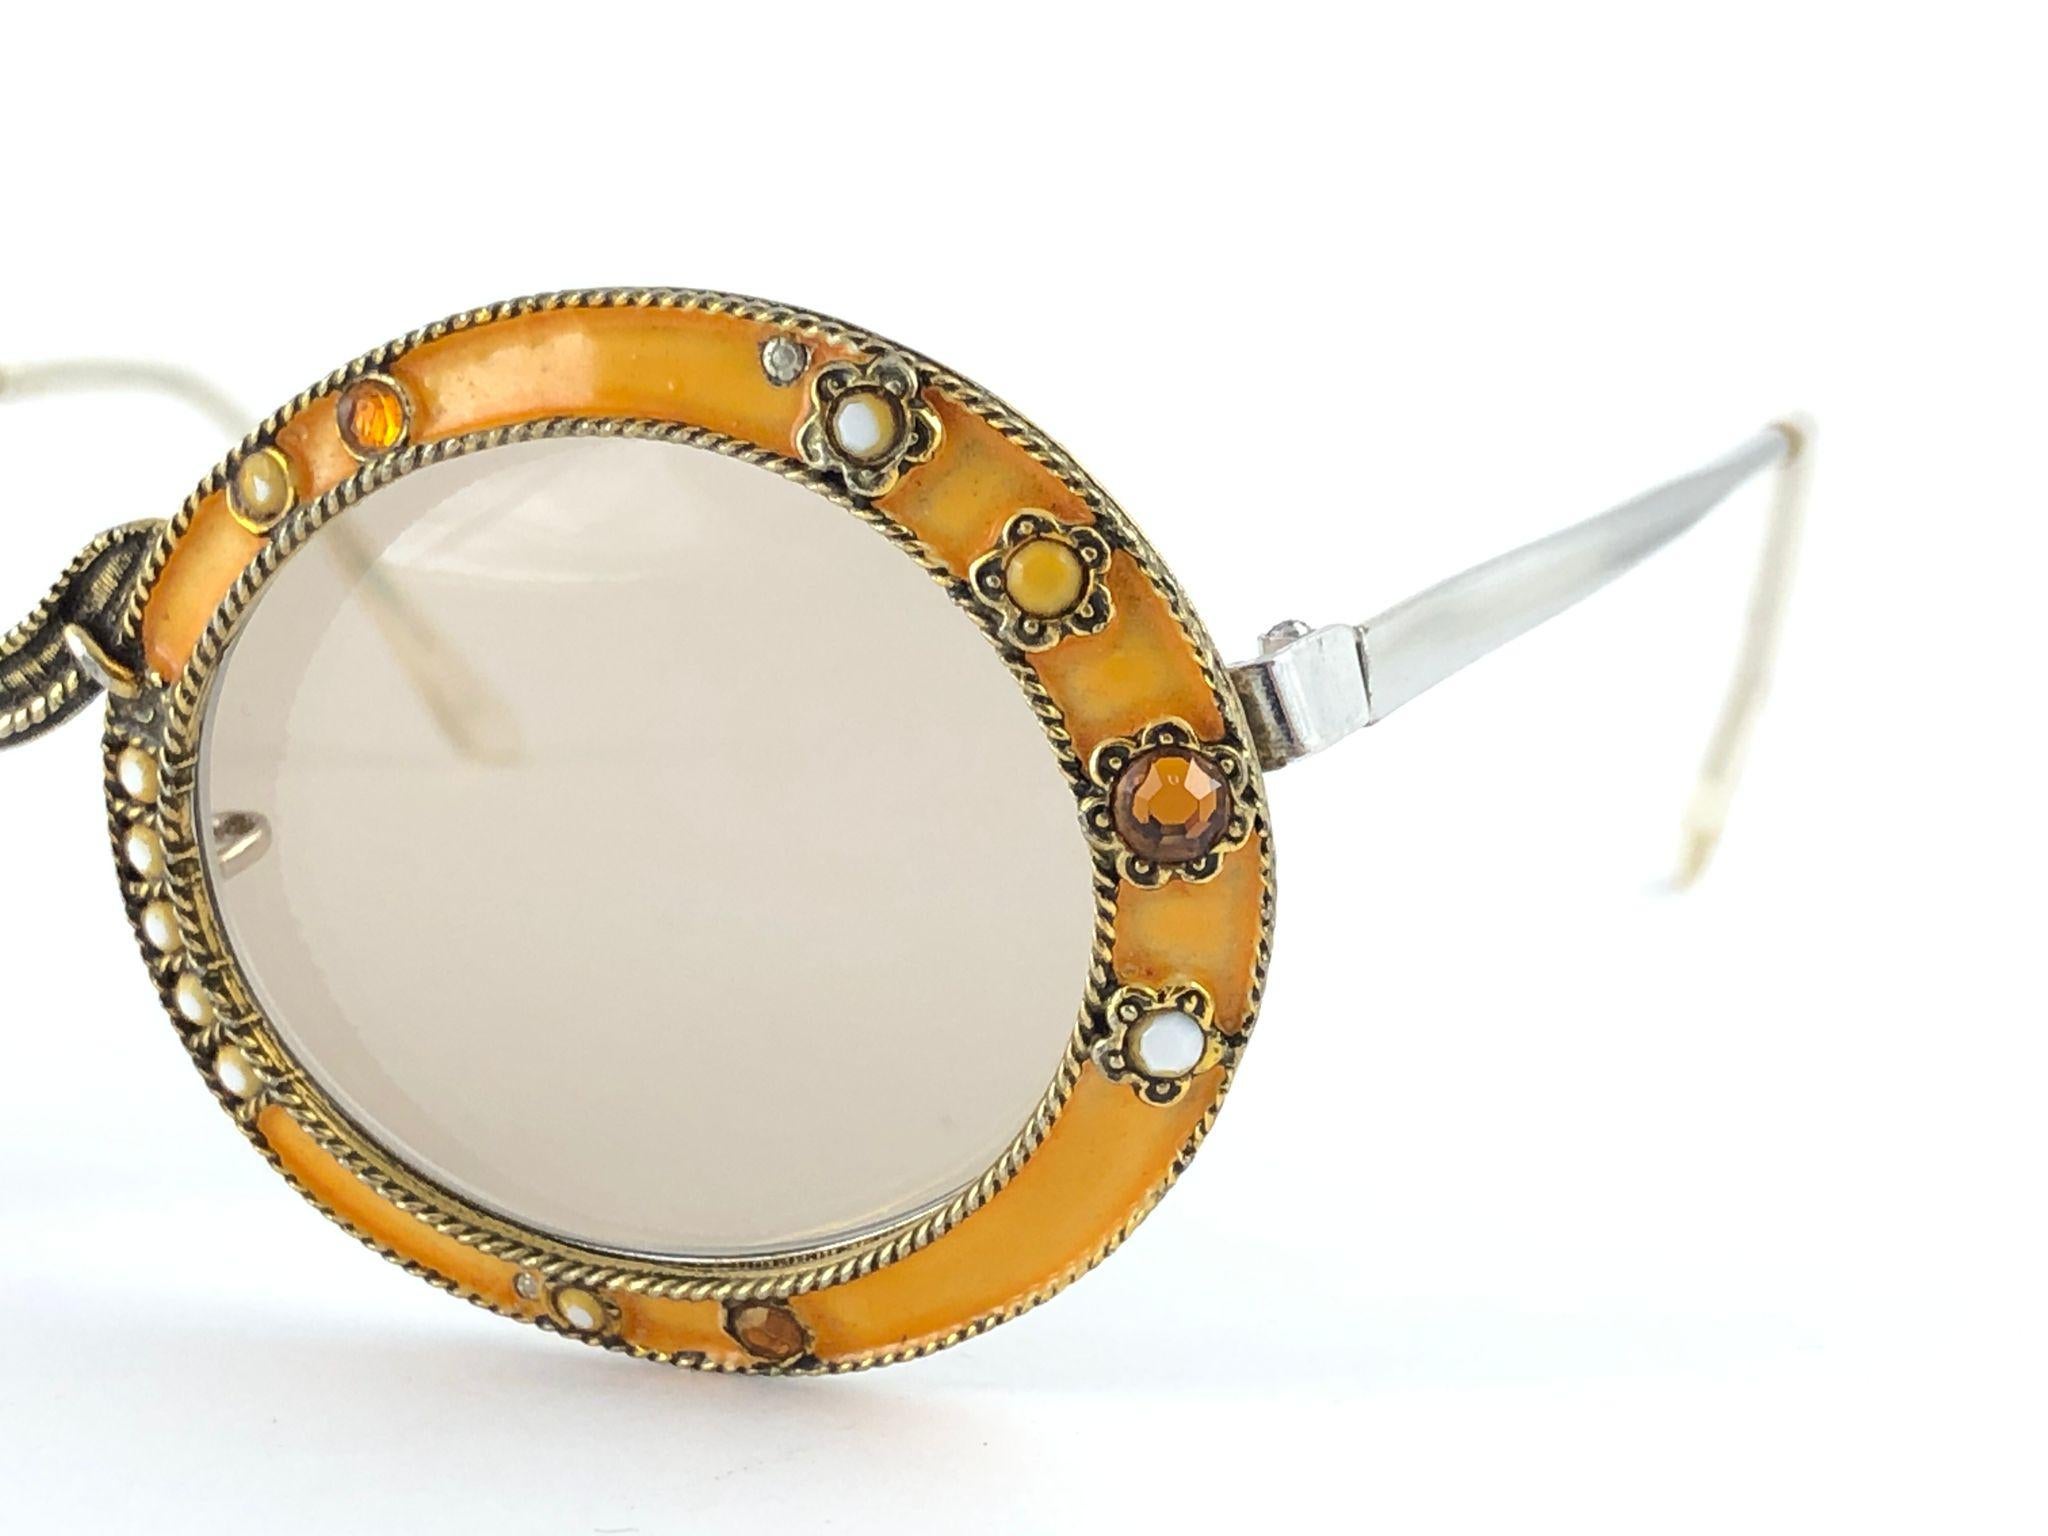 Ultra rare pair of Christian Dior Sunglasses circa 1960's by Tura.  

This is a seldom and rare piece not only for its aesthetic value but for its importance in the sunglasses and fashion history.   
Delicate enamel ornamented cast iron frame with